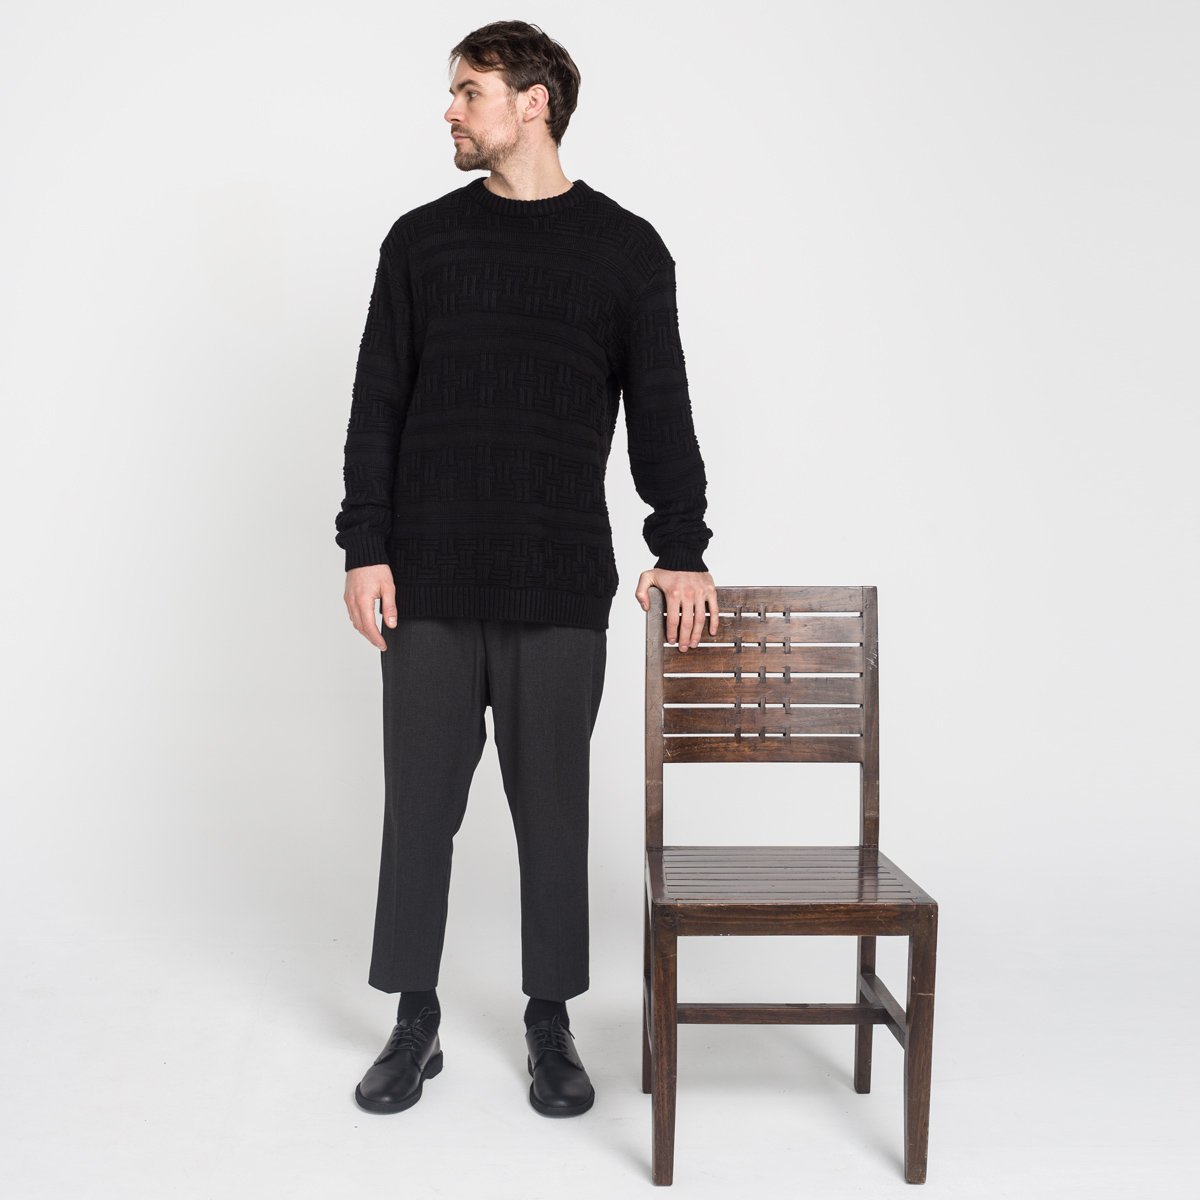 Sarouel Pince Wool Noir Chiné - DCjeans saroual and clothing